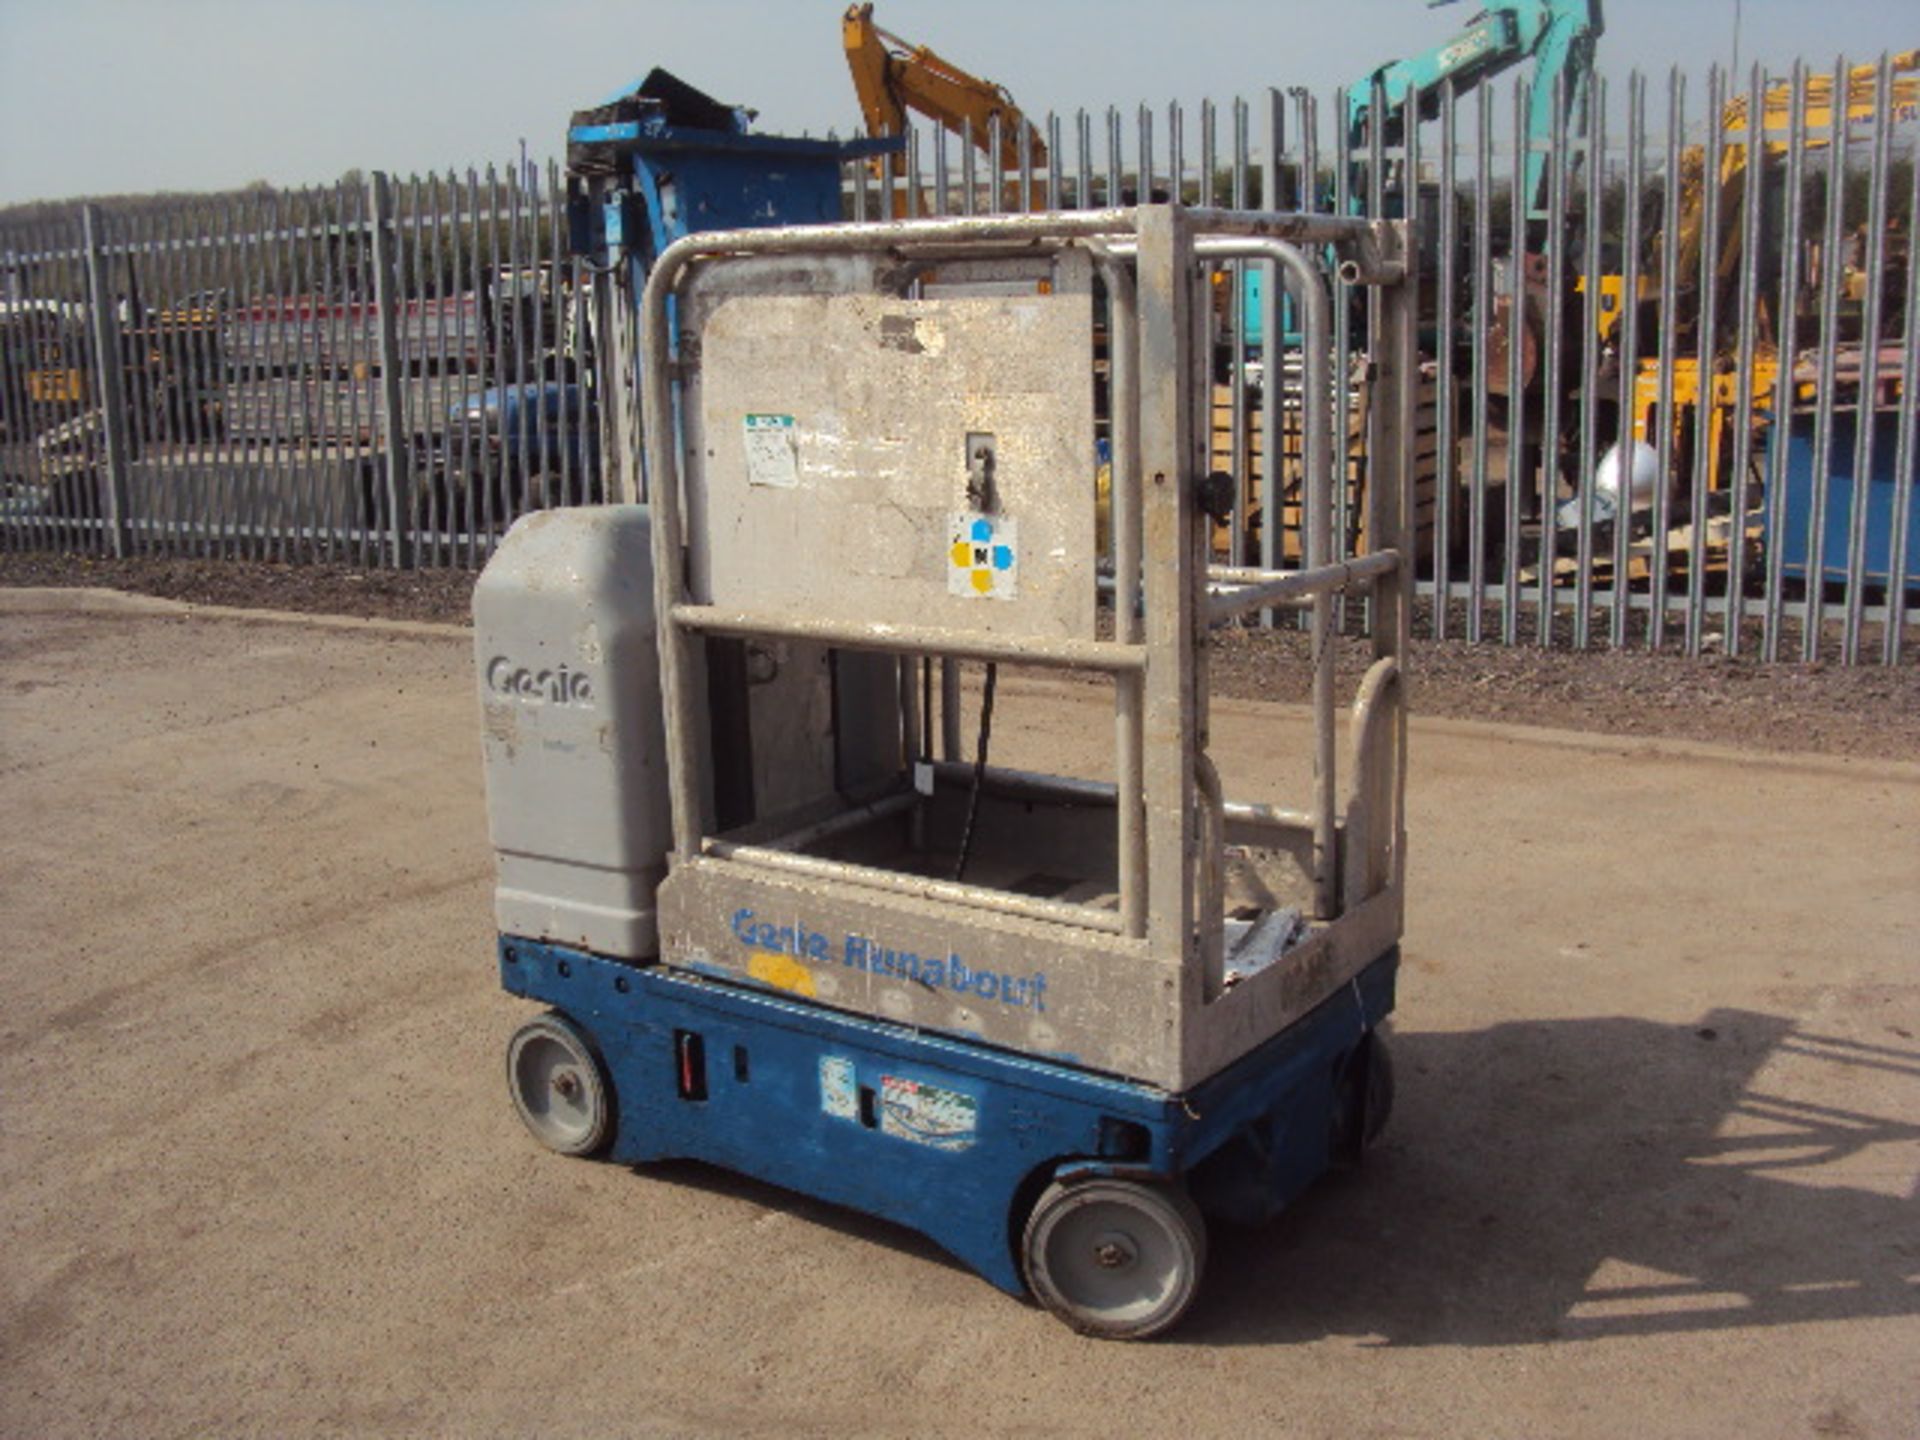 2001 GENIE GR15 Runabout battery driven vertical man-lift (RDL) - Image 2 of 6